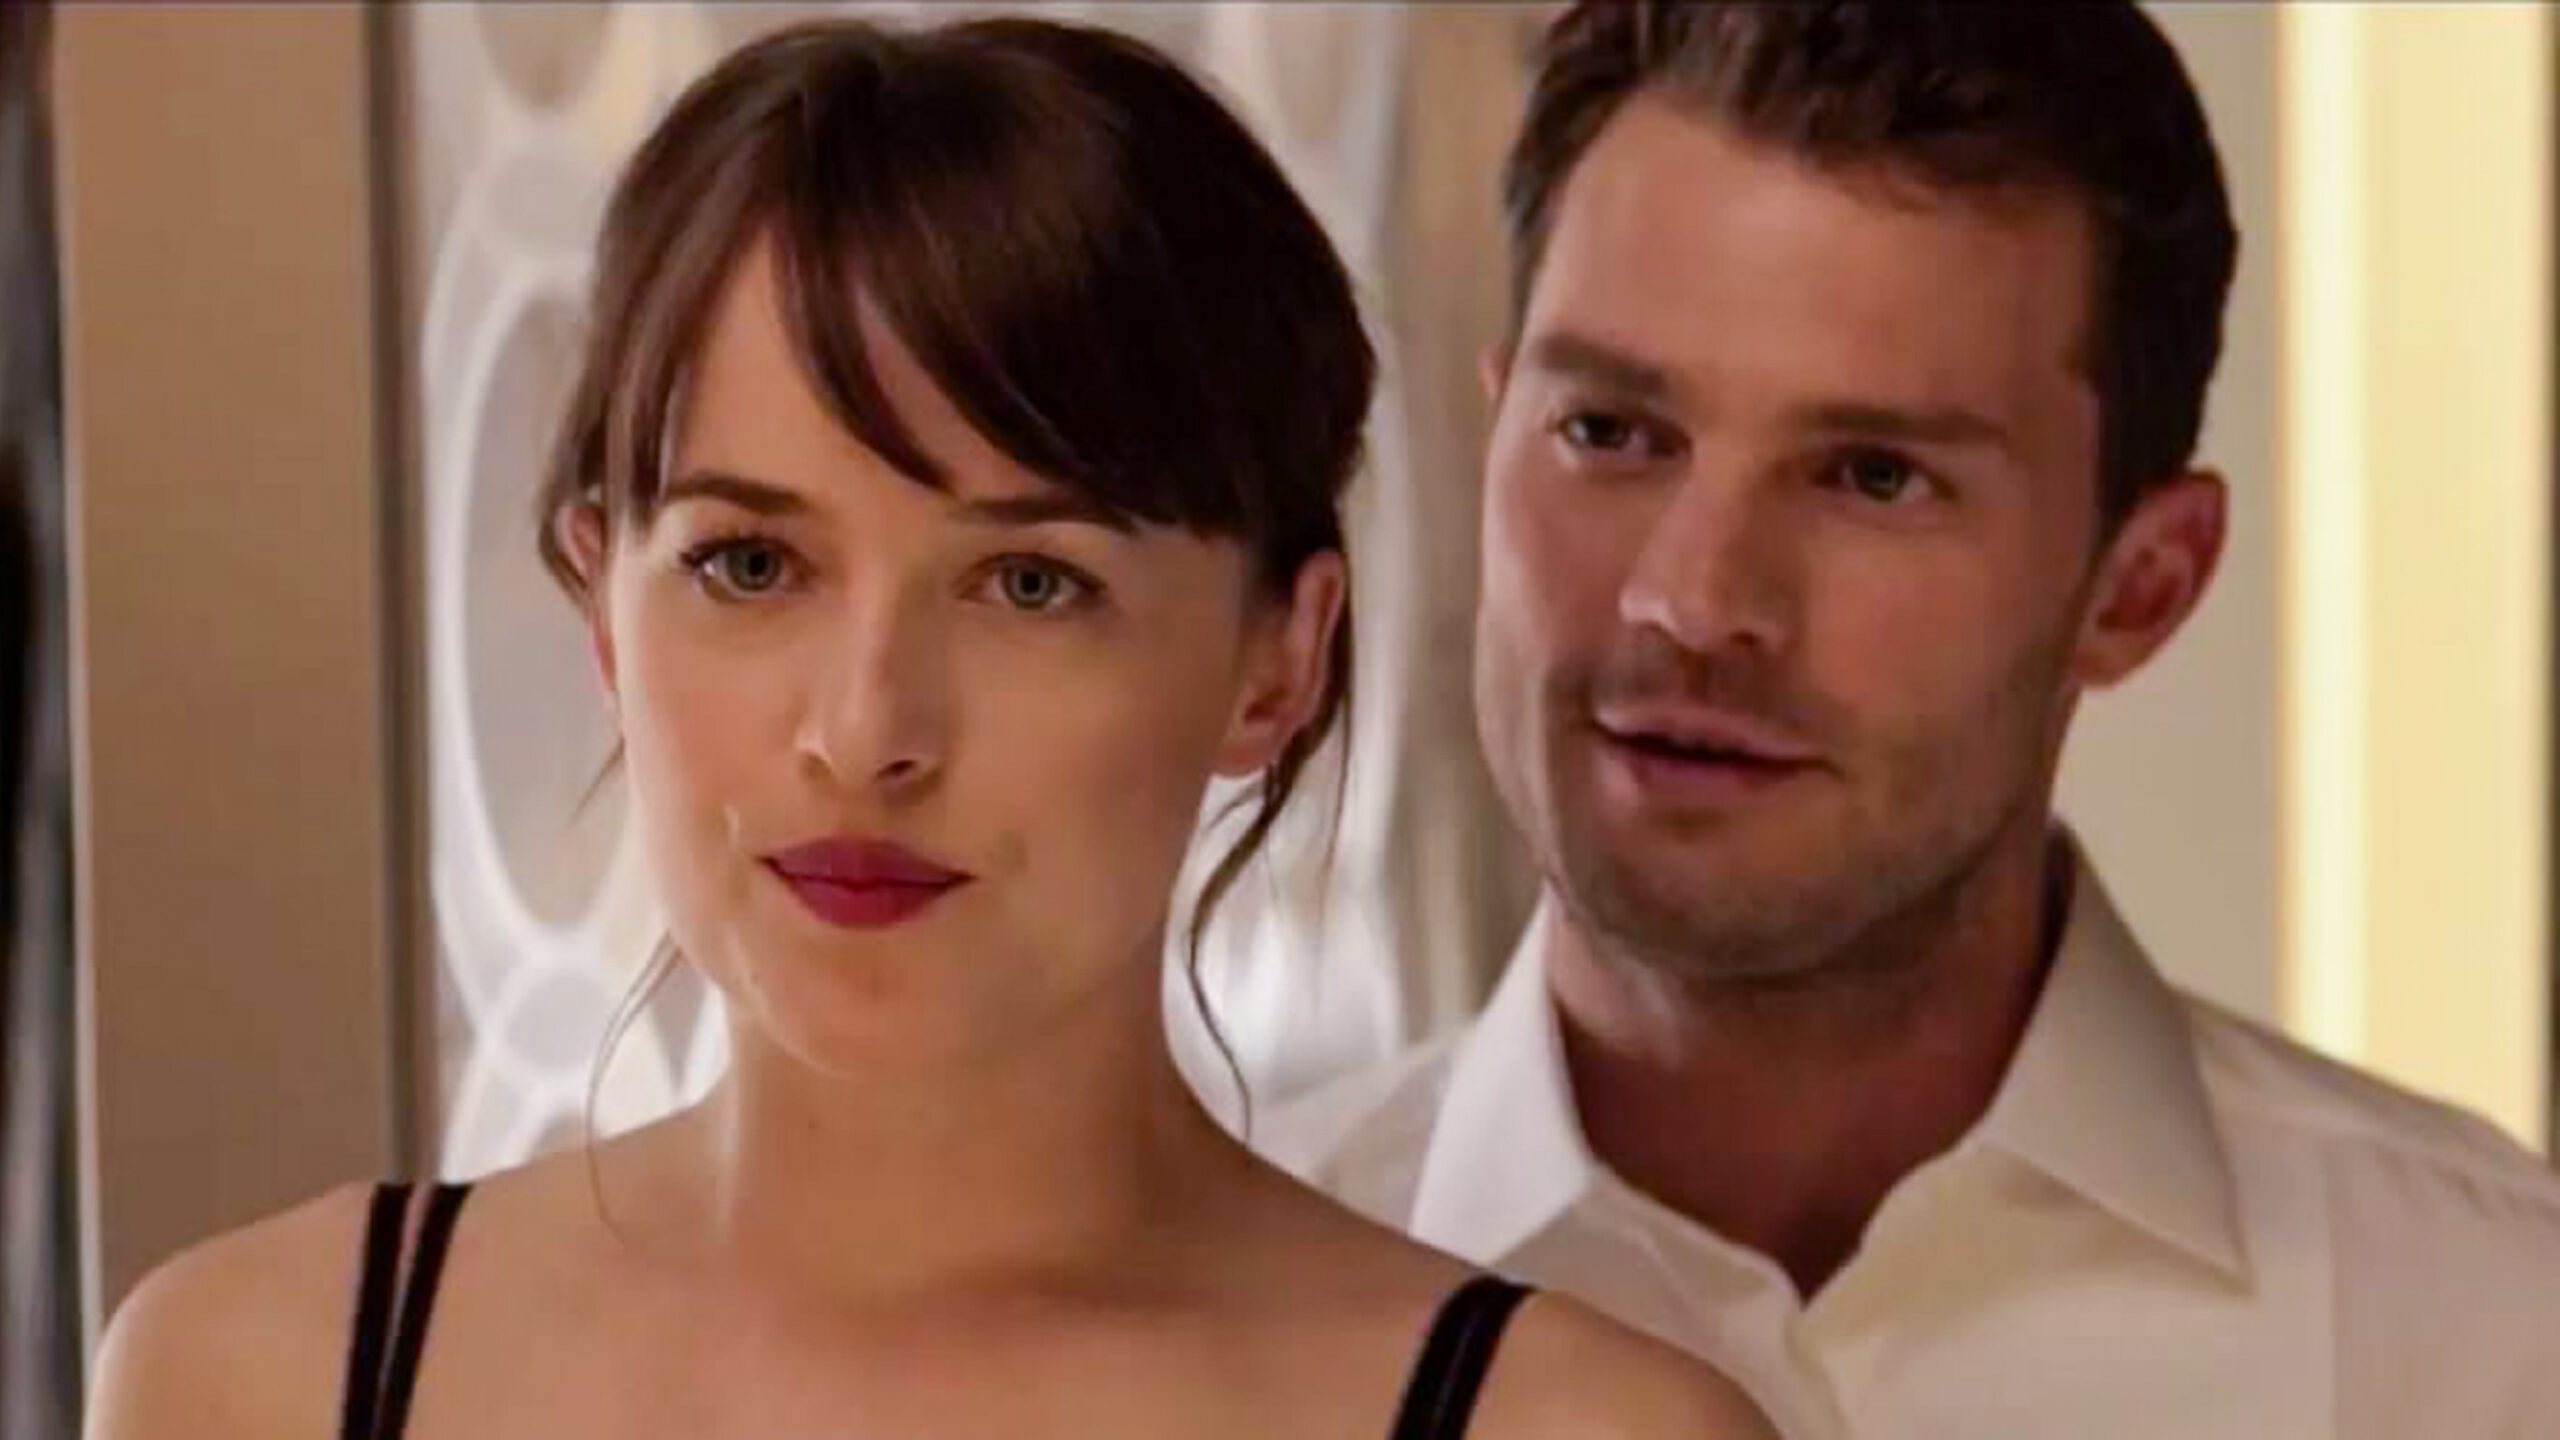 WATCH: Christian Grey proposes to Anastasia Steele in ‘Fifty Shades’ trailer